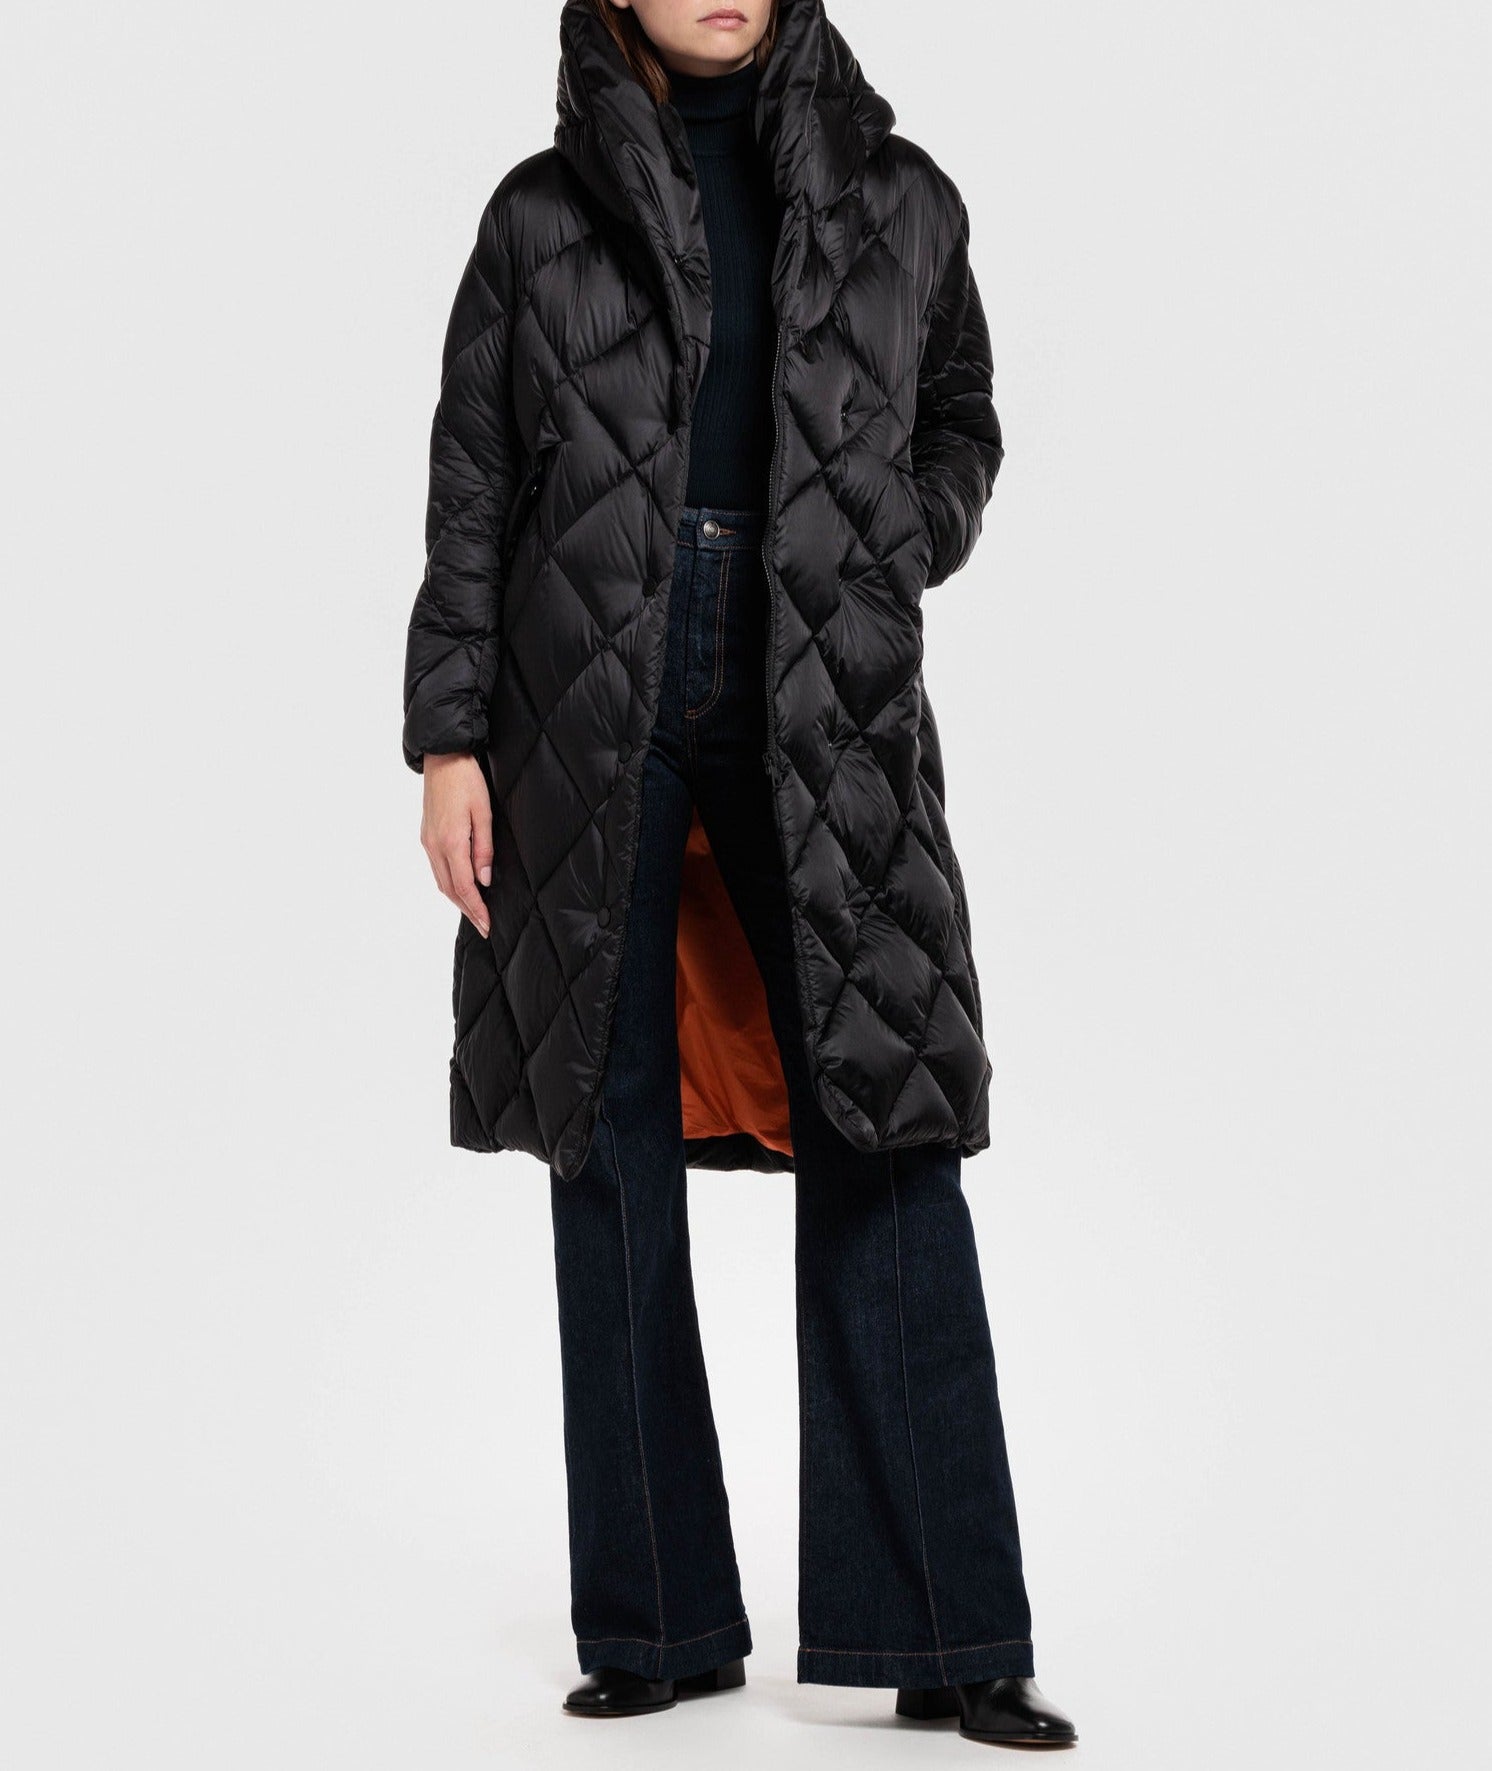 Creenstone Quilted Puffer Coat Black